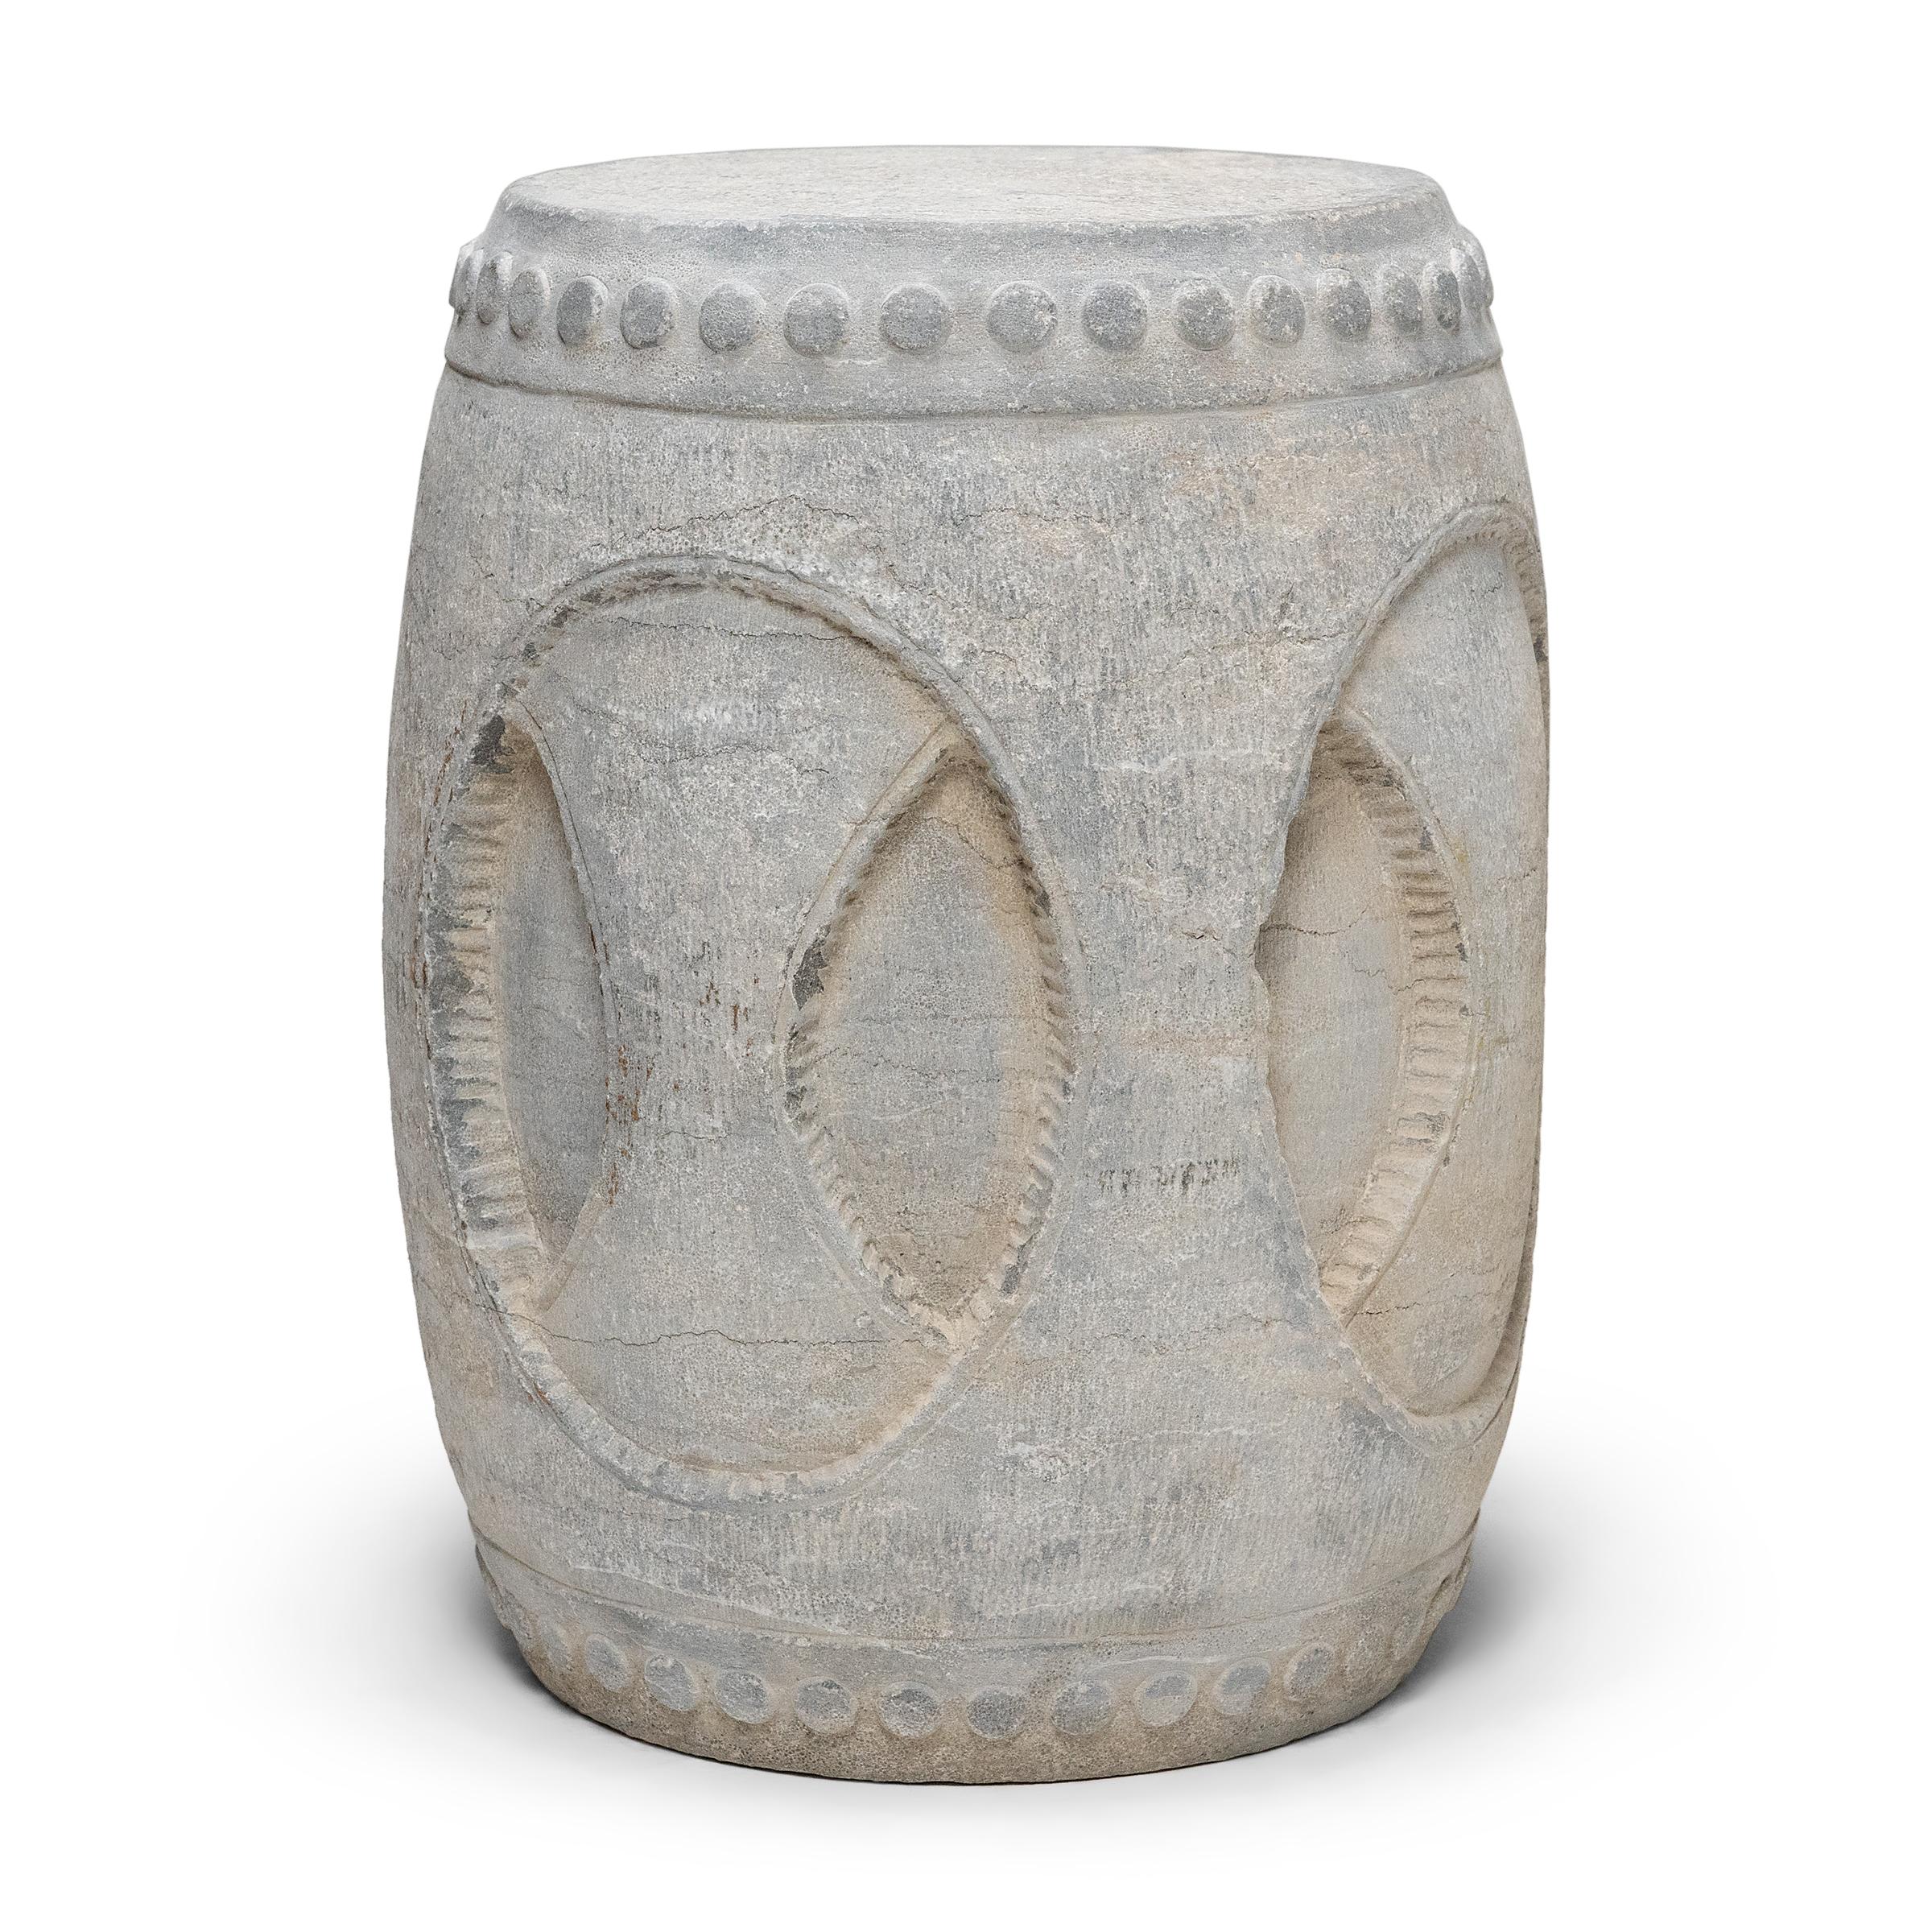 Drum-form stools such as these were traditionally used in gardens and outdoor pavilions where upper class scholars read, wrote, gathered for discussion and, in general, developed their inner sensibilities. This contemporary example was carved from